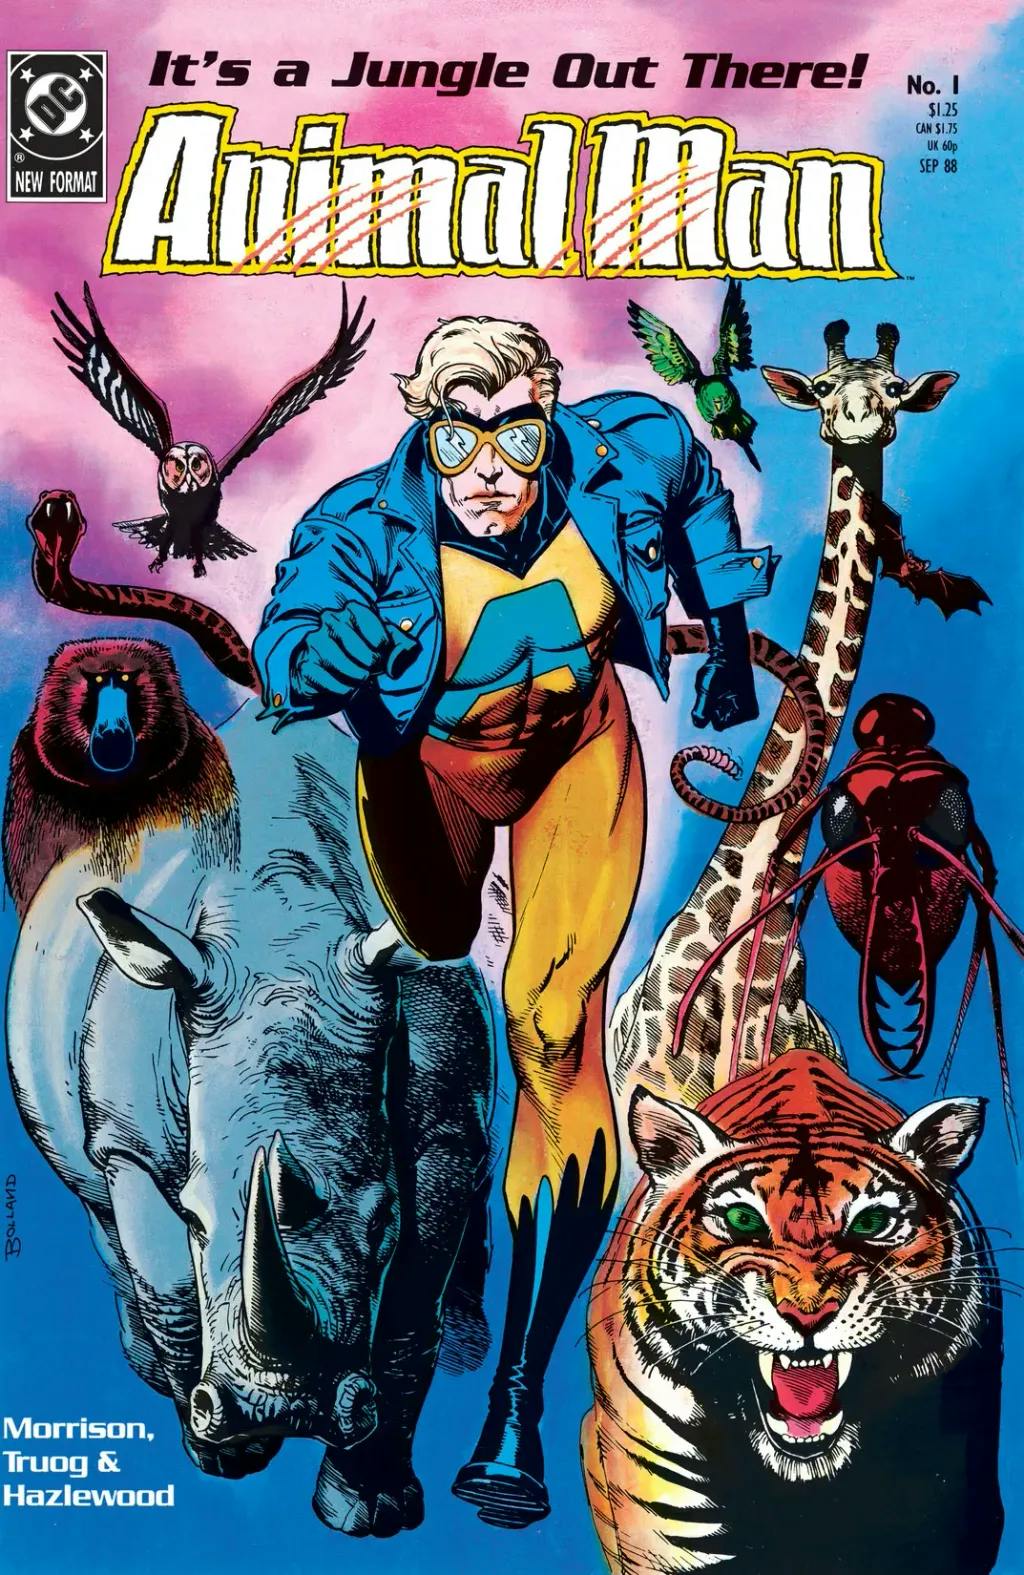 Cover of Animal Man #1 by Grant Morrison and Chas Truog, with art by Brian Bolland